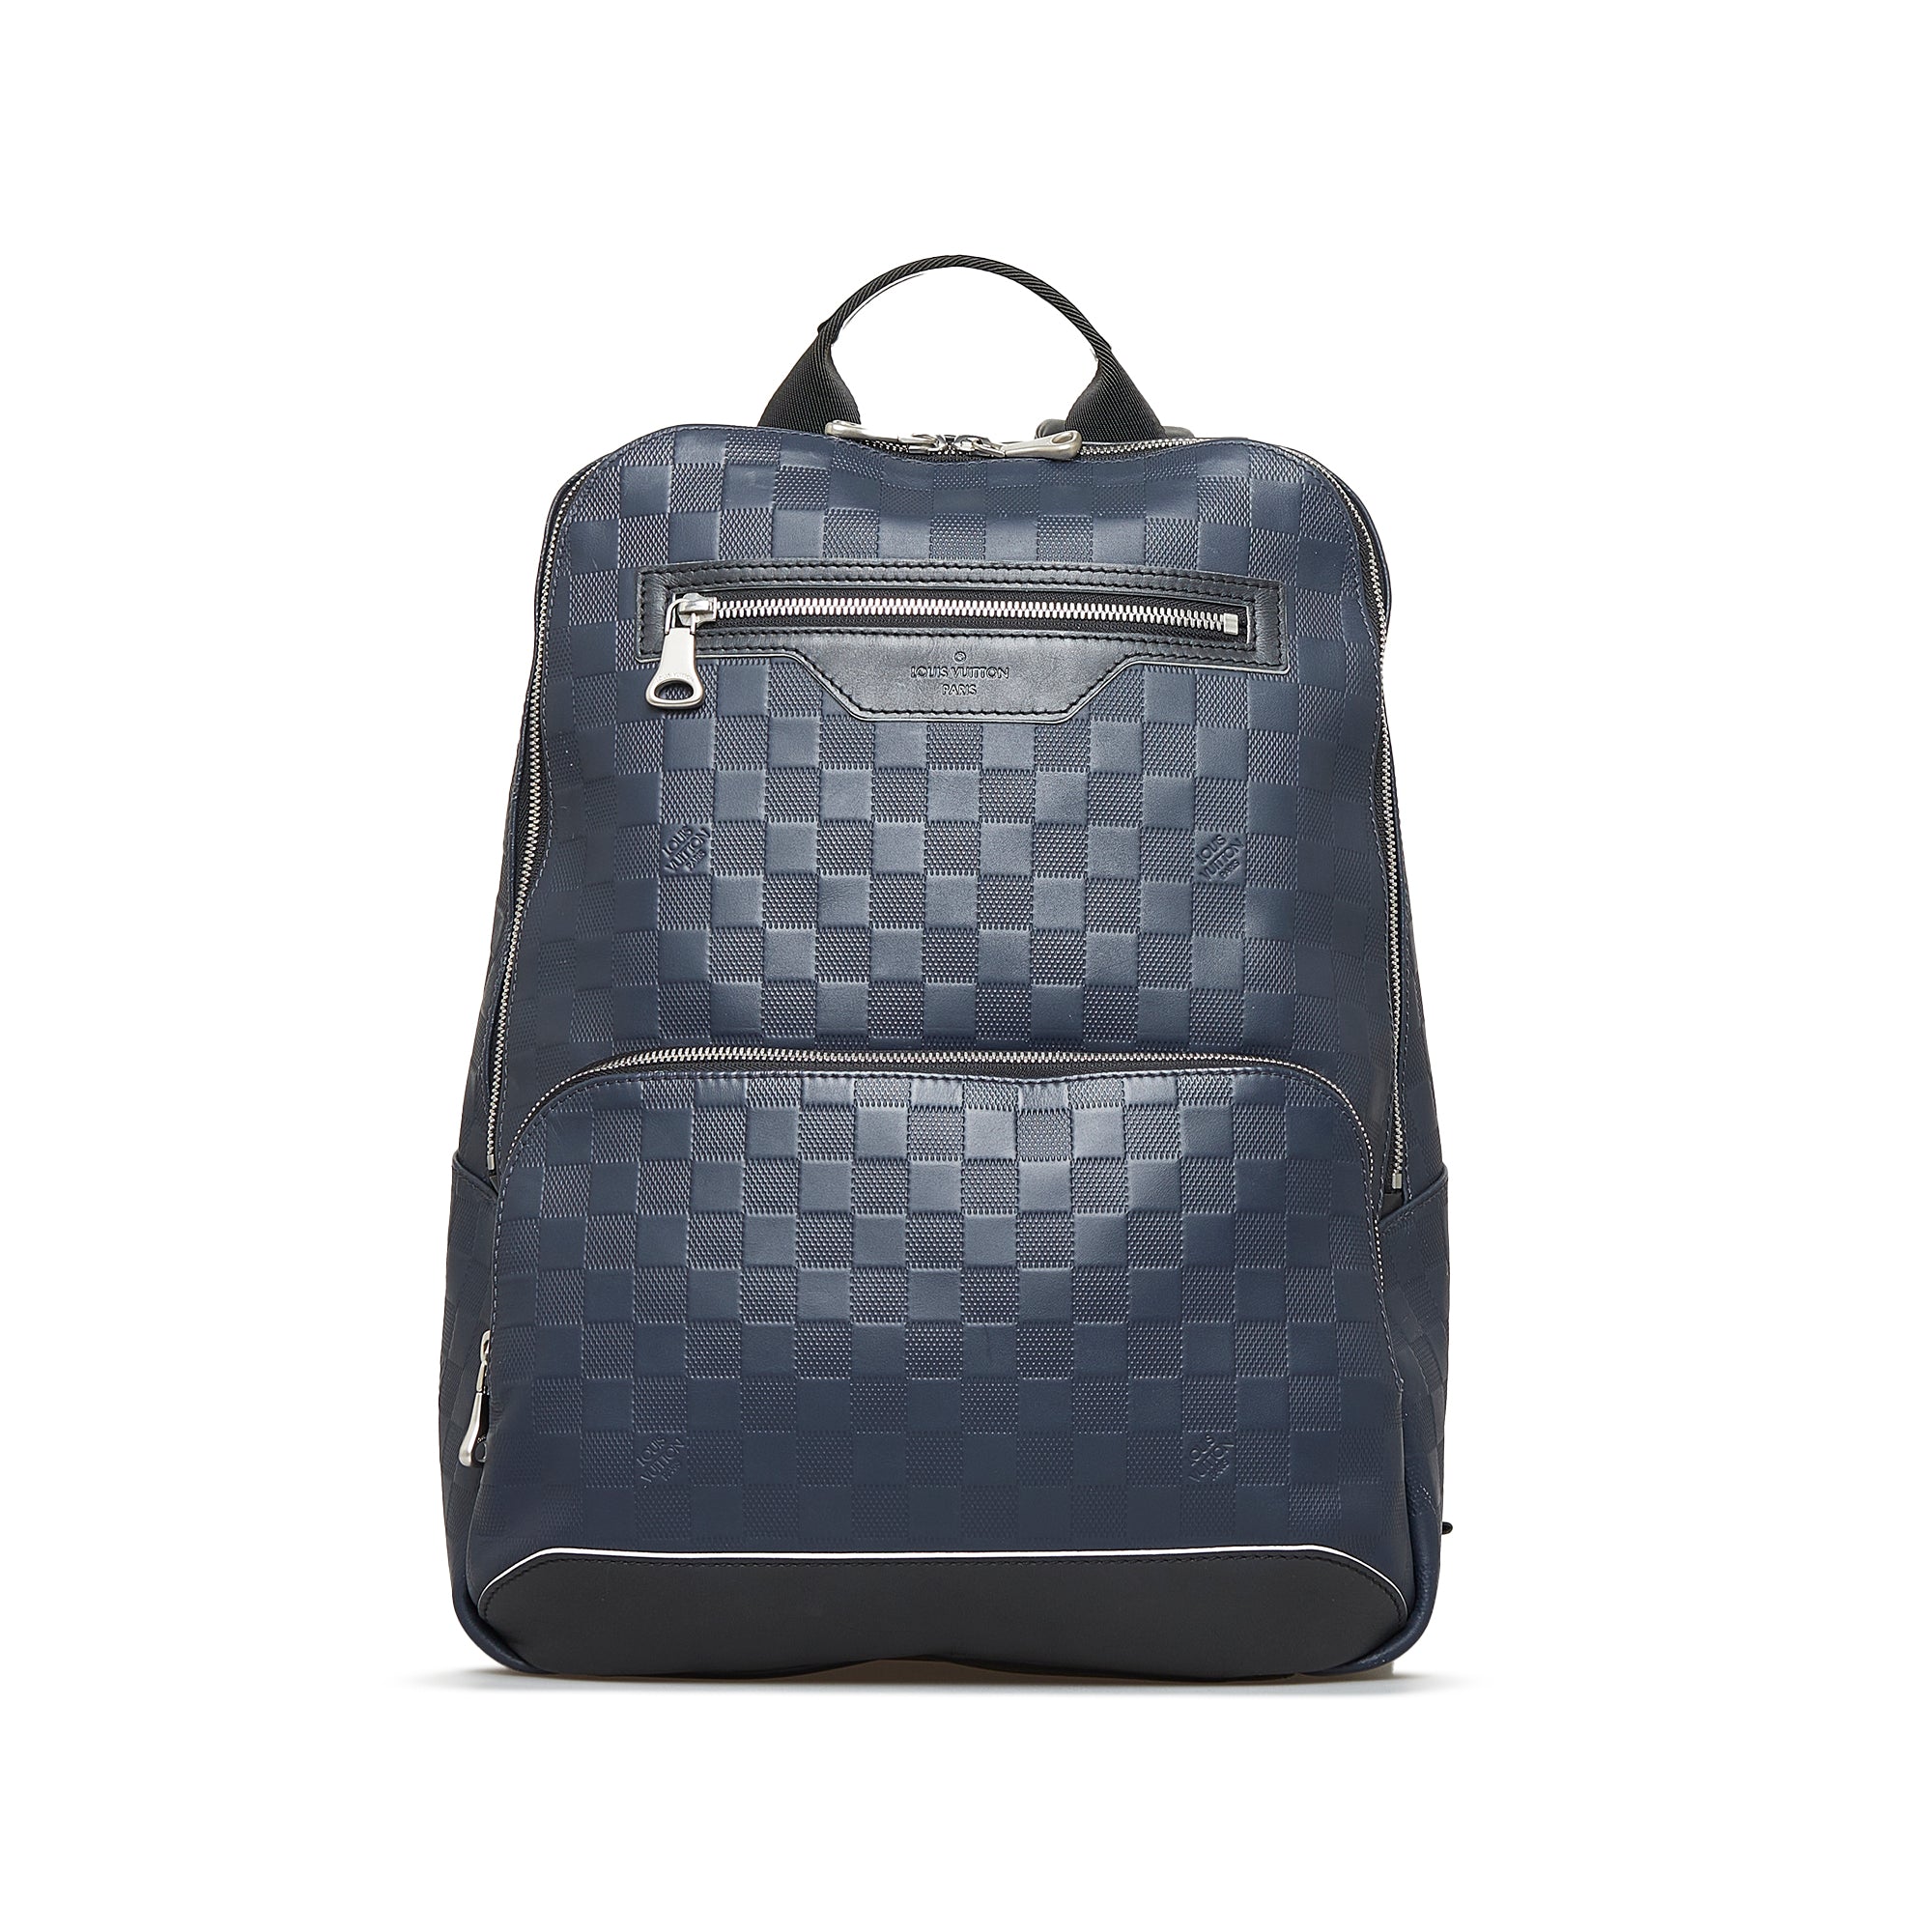 How much does a Louis Vuitton backpack cost? Where can I buy one